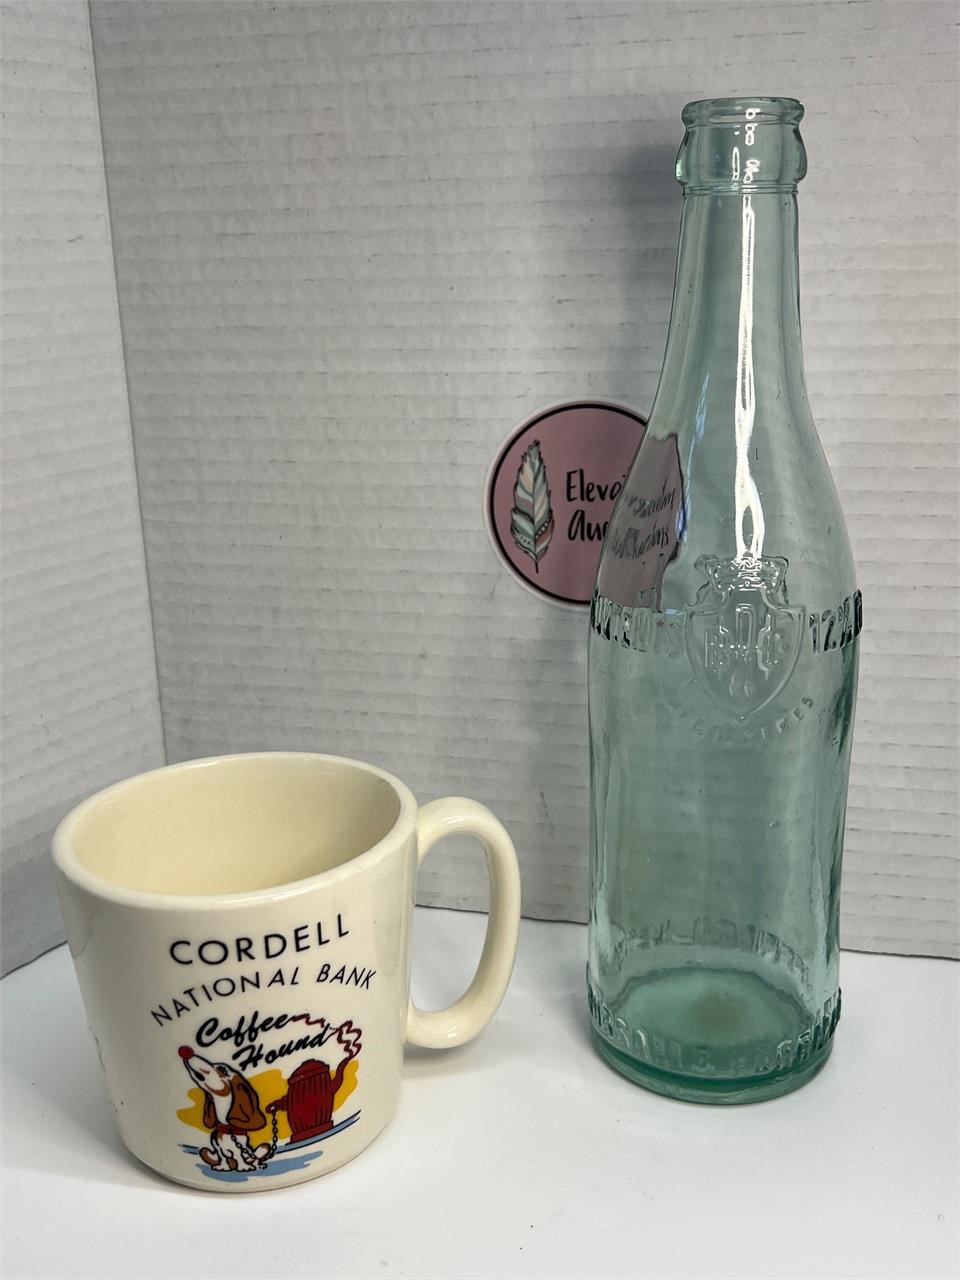 Vintage Cup and Bottle